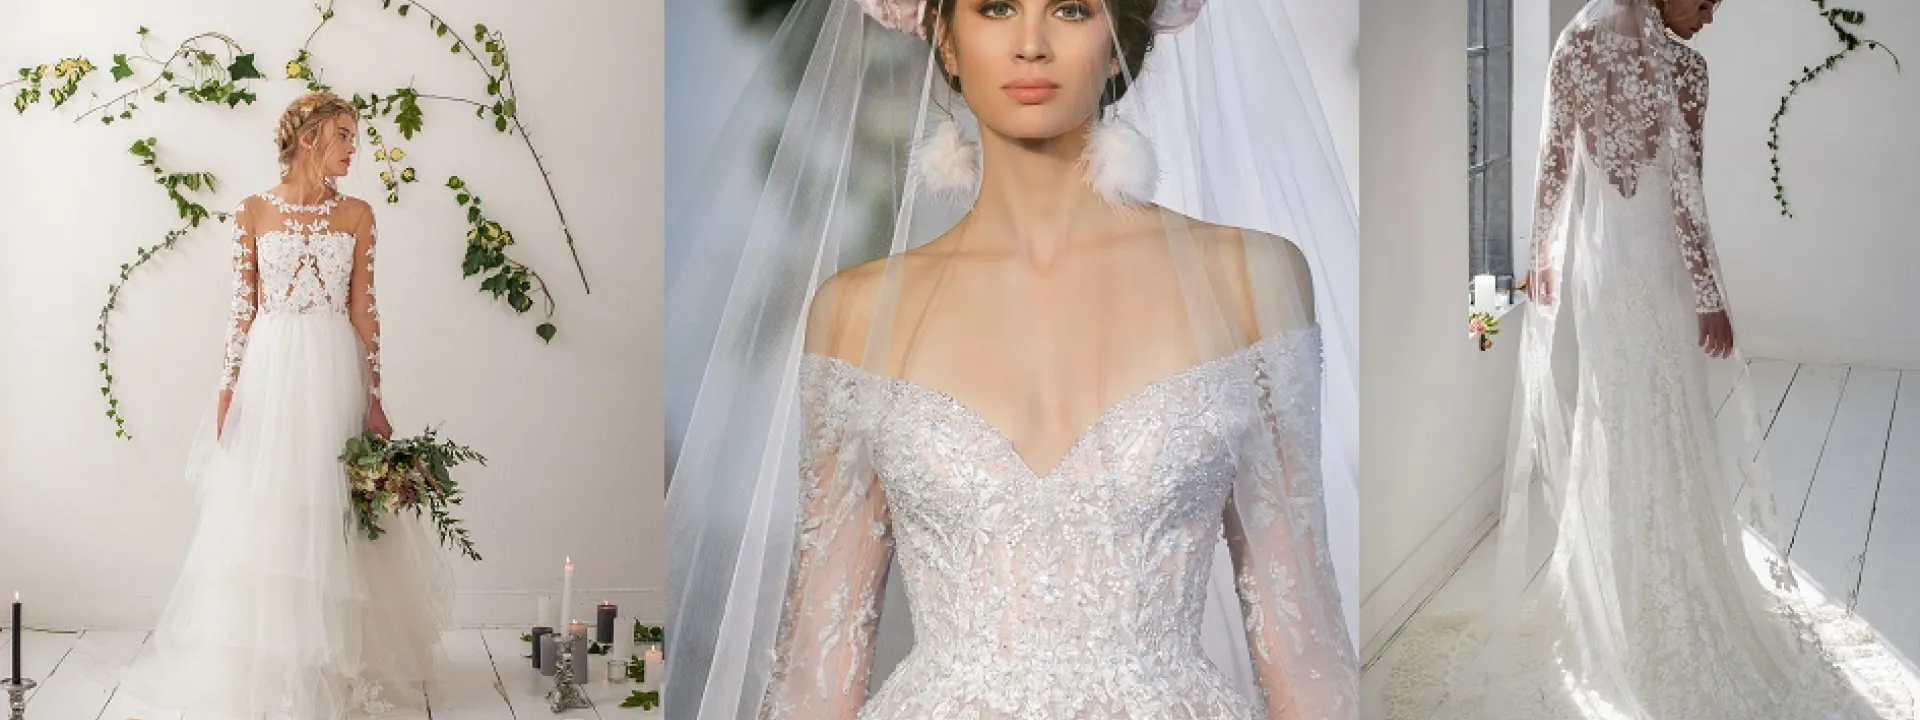 5 Modern Wedding Gowns Fit for A Princess | California Wedding Day